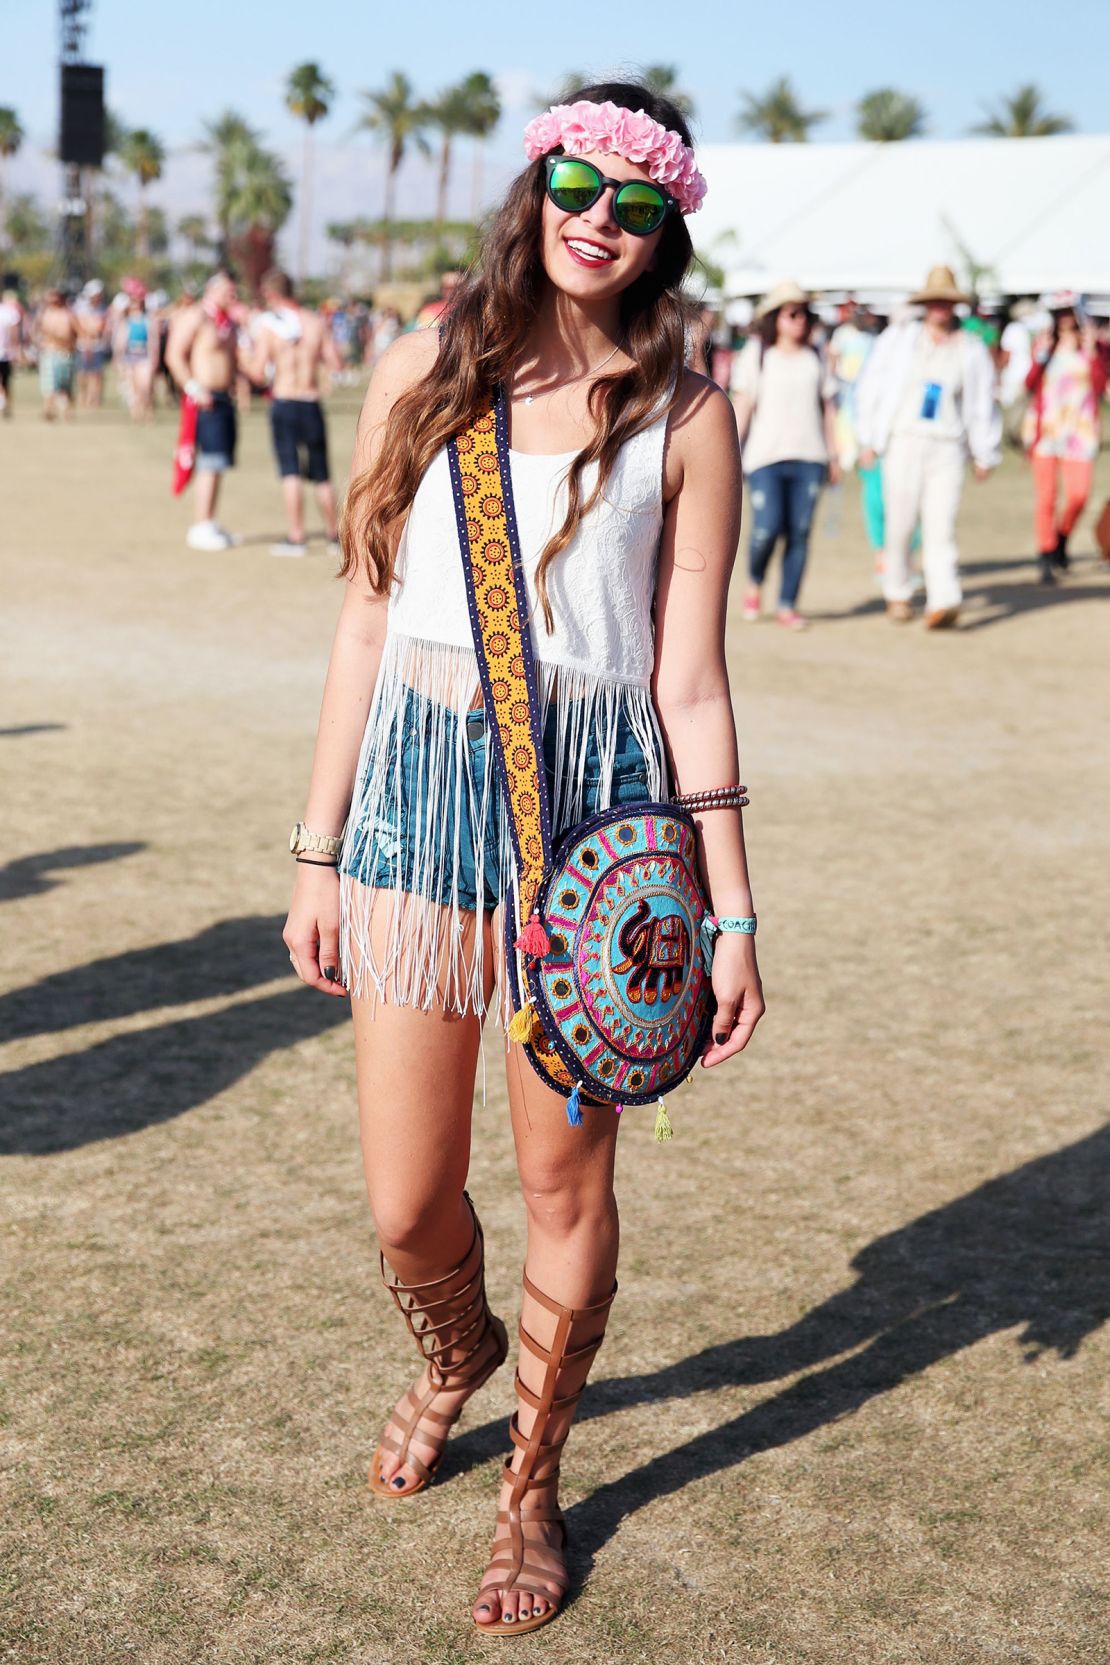 Coachella is back. But have festivals escaped the problematic legacy of ...